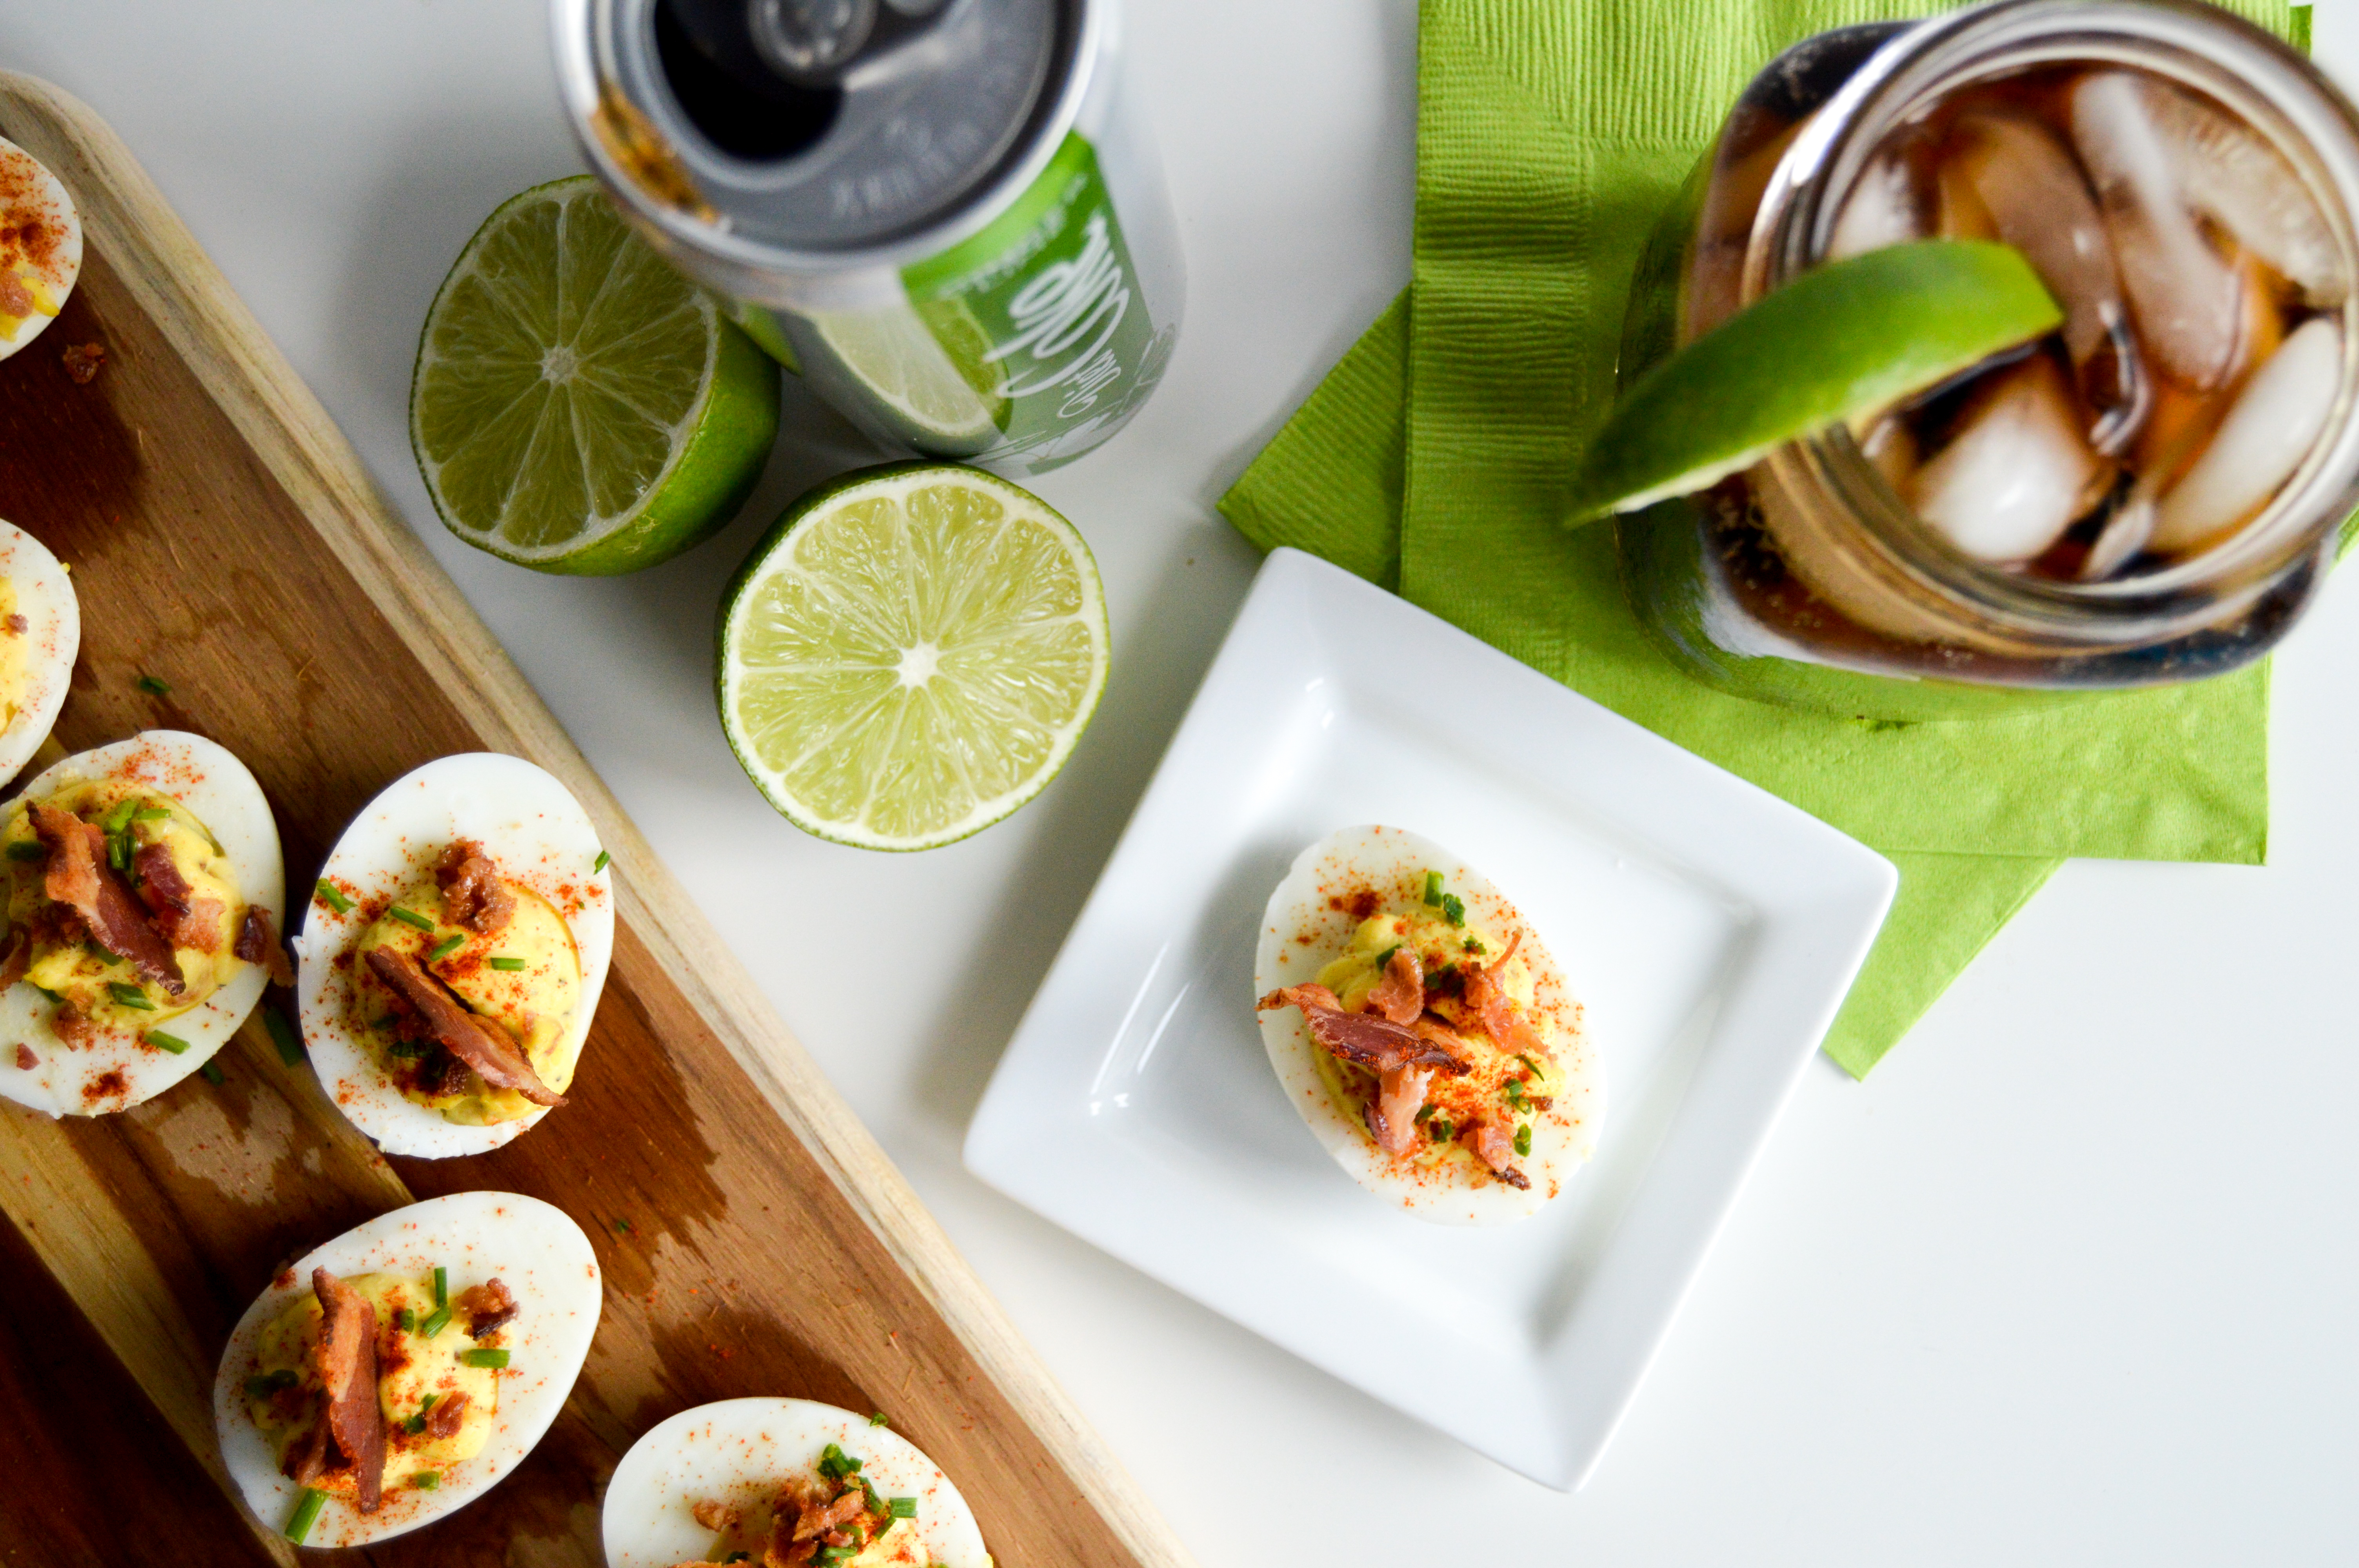 These bacon loaded deviled eggs served with Diet Coke Ginger Lime drinks make for perfect party food.